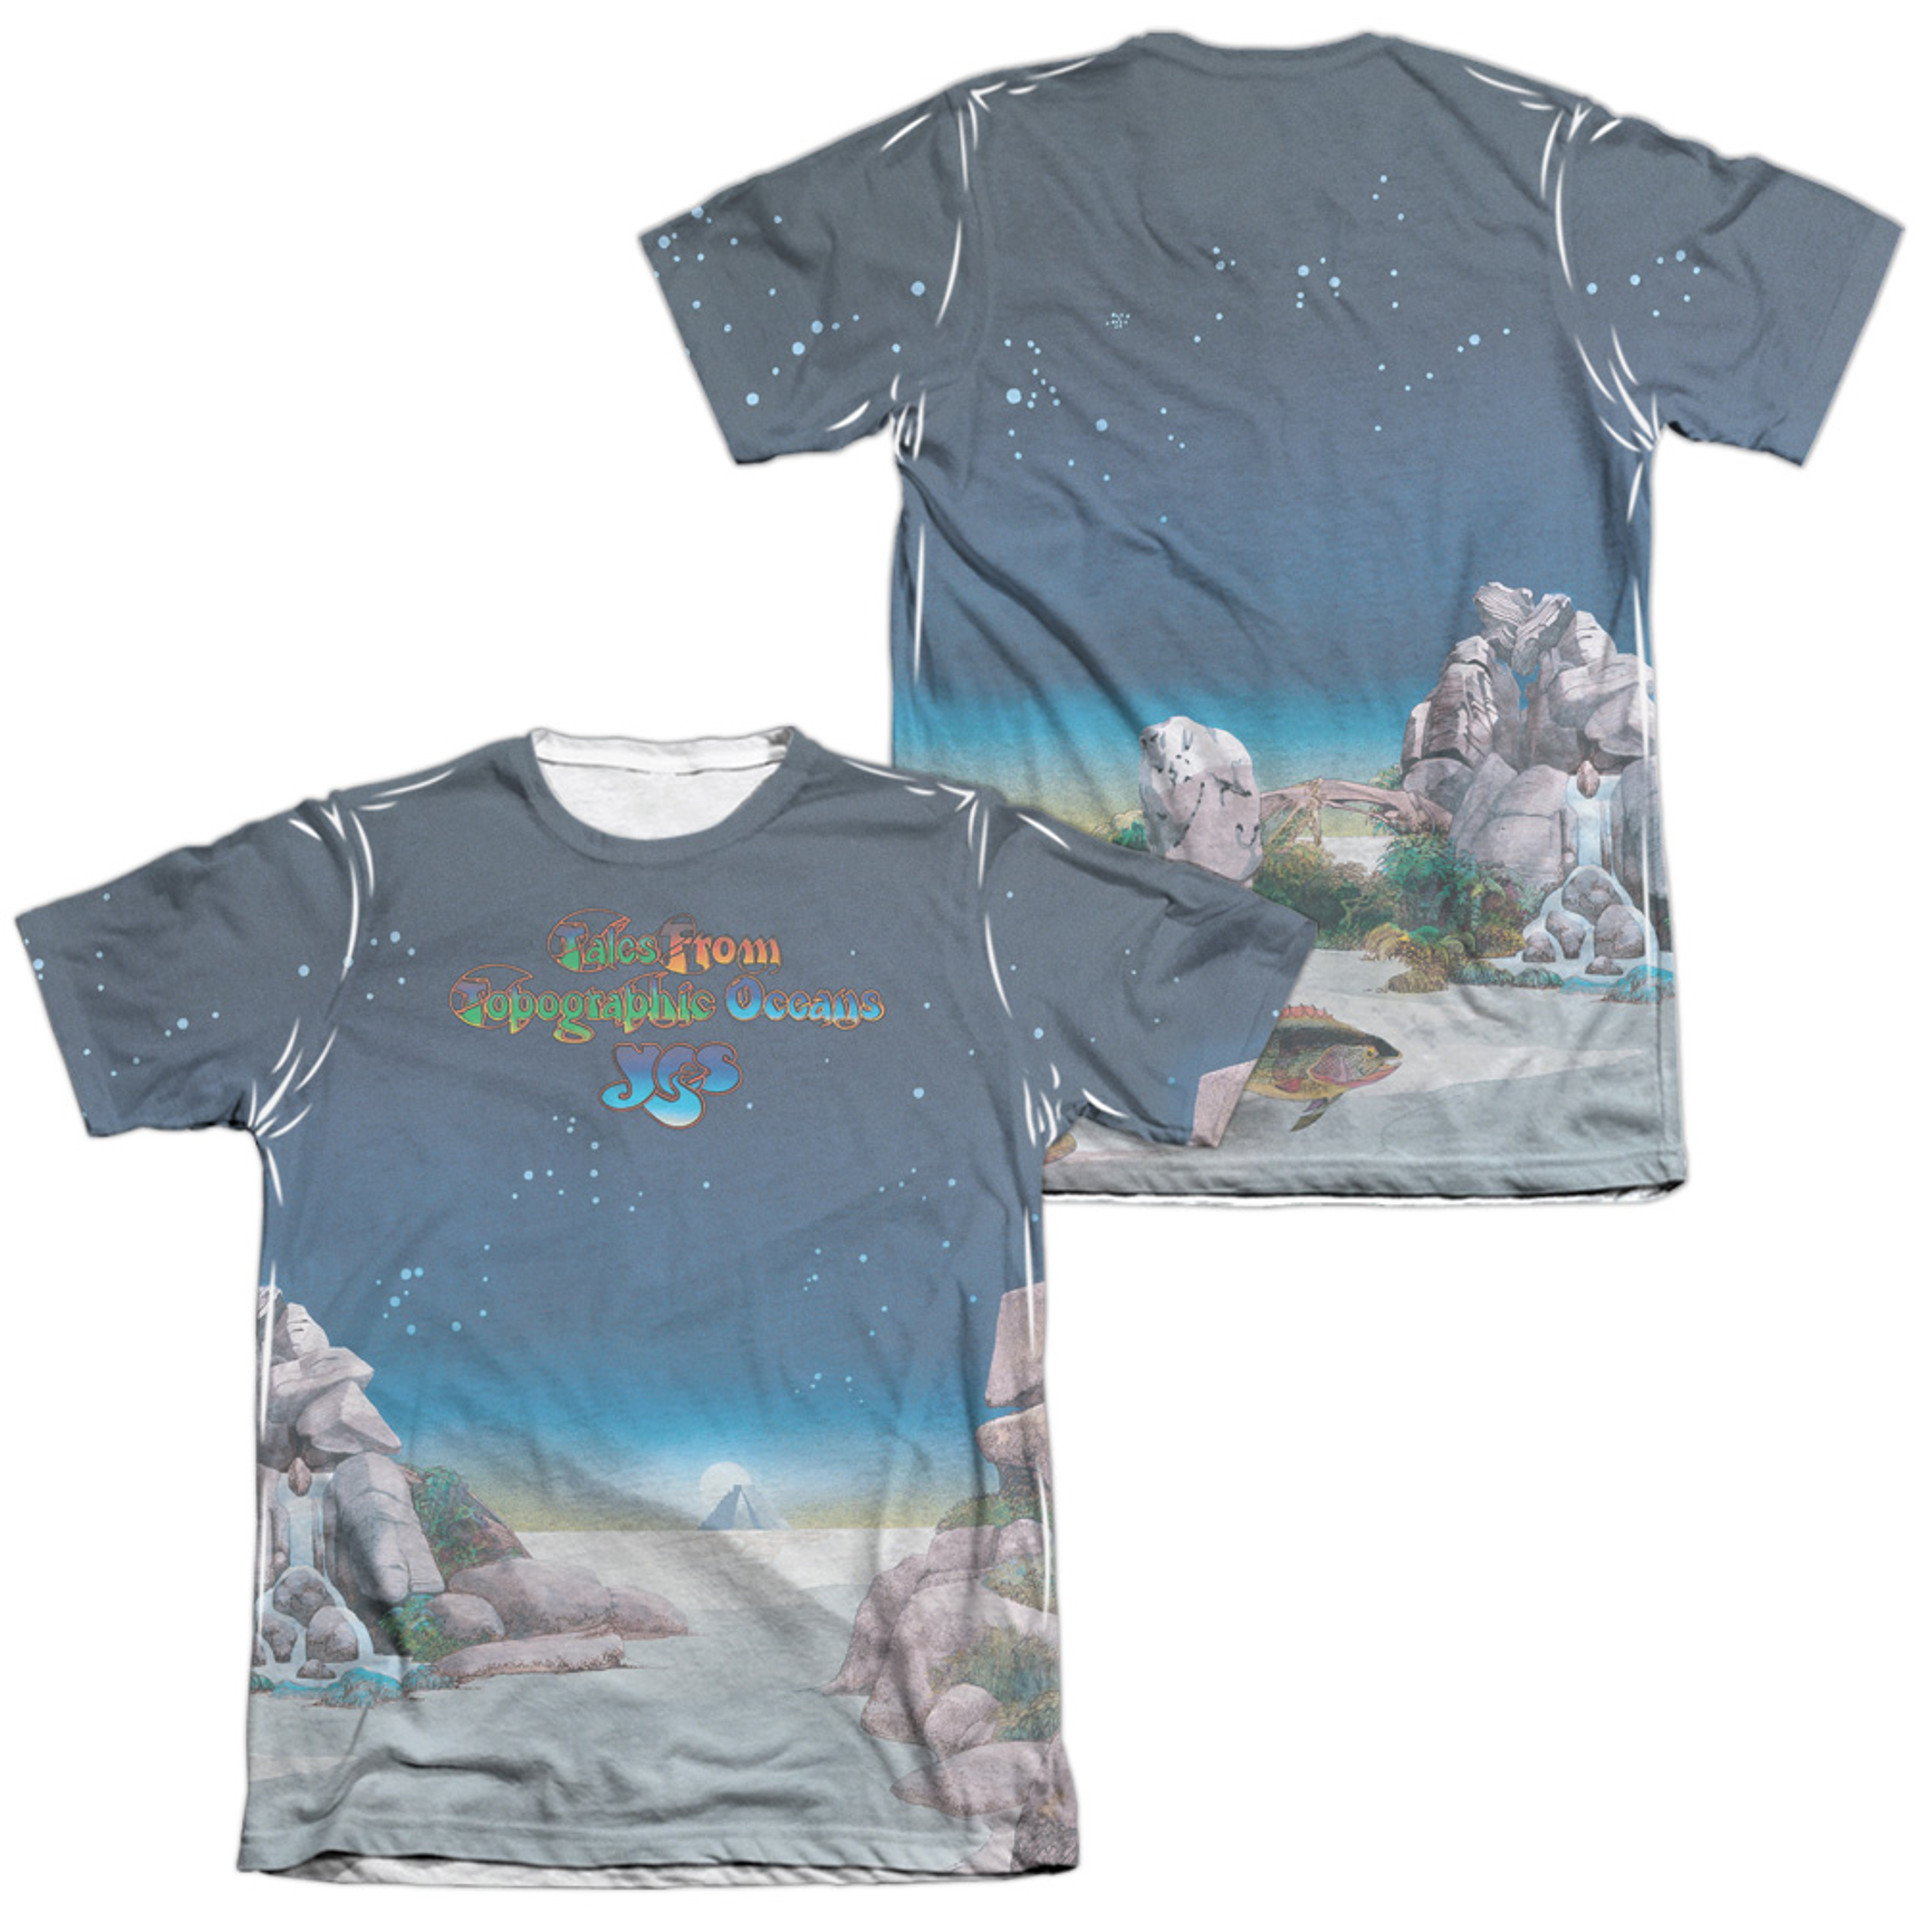 yes topographic oceans (frontback print) adult sublimated t shirt white 3371 kilkf